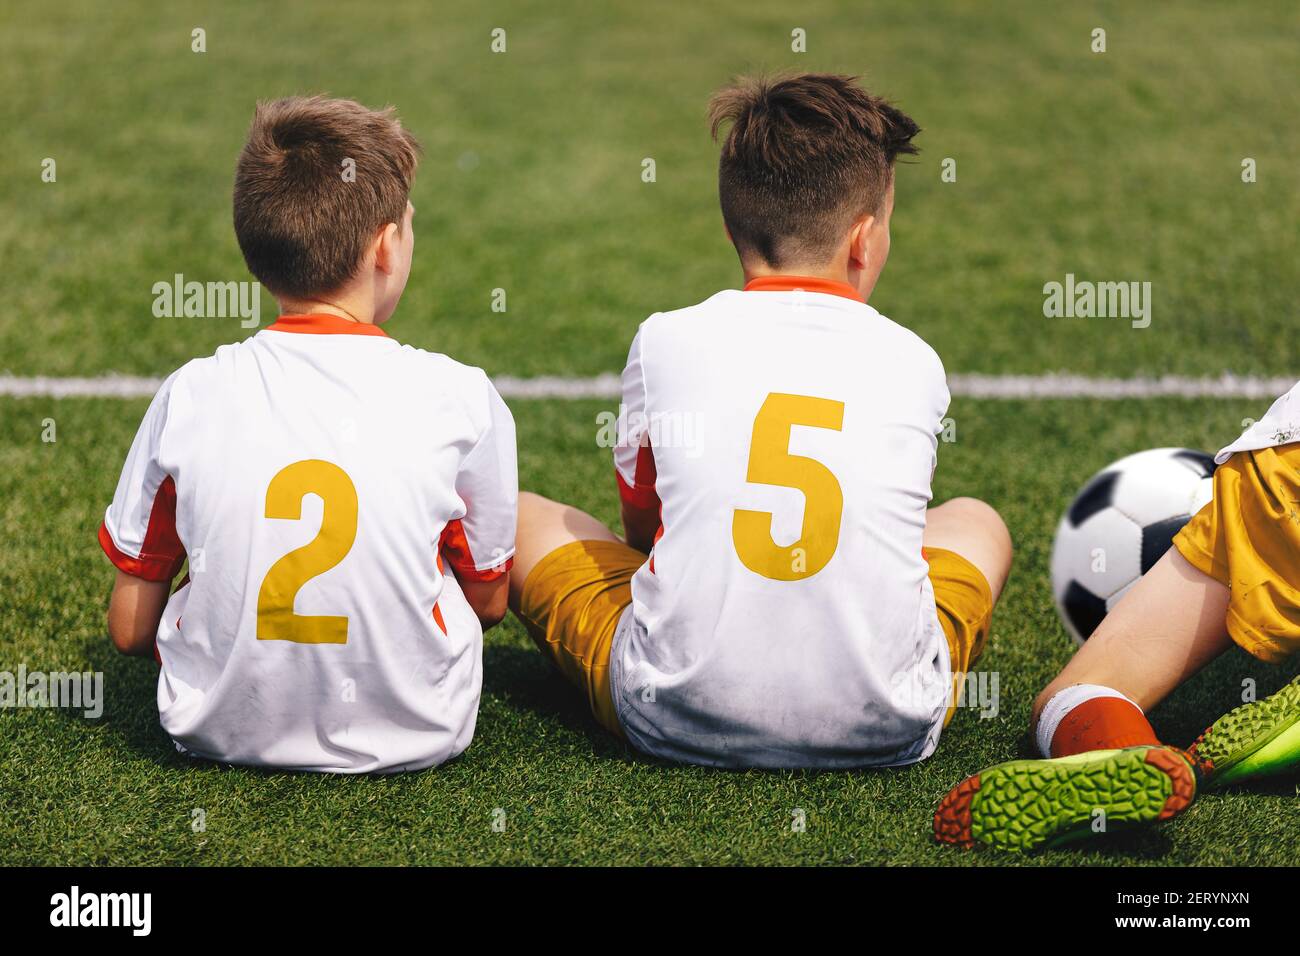 Boys in Soccer Jerseys with Golden Player Numbers on Back. Football Team Sitting on Sideline. Group of Young Boys in School Sports Team Stock Photo